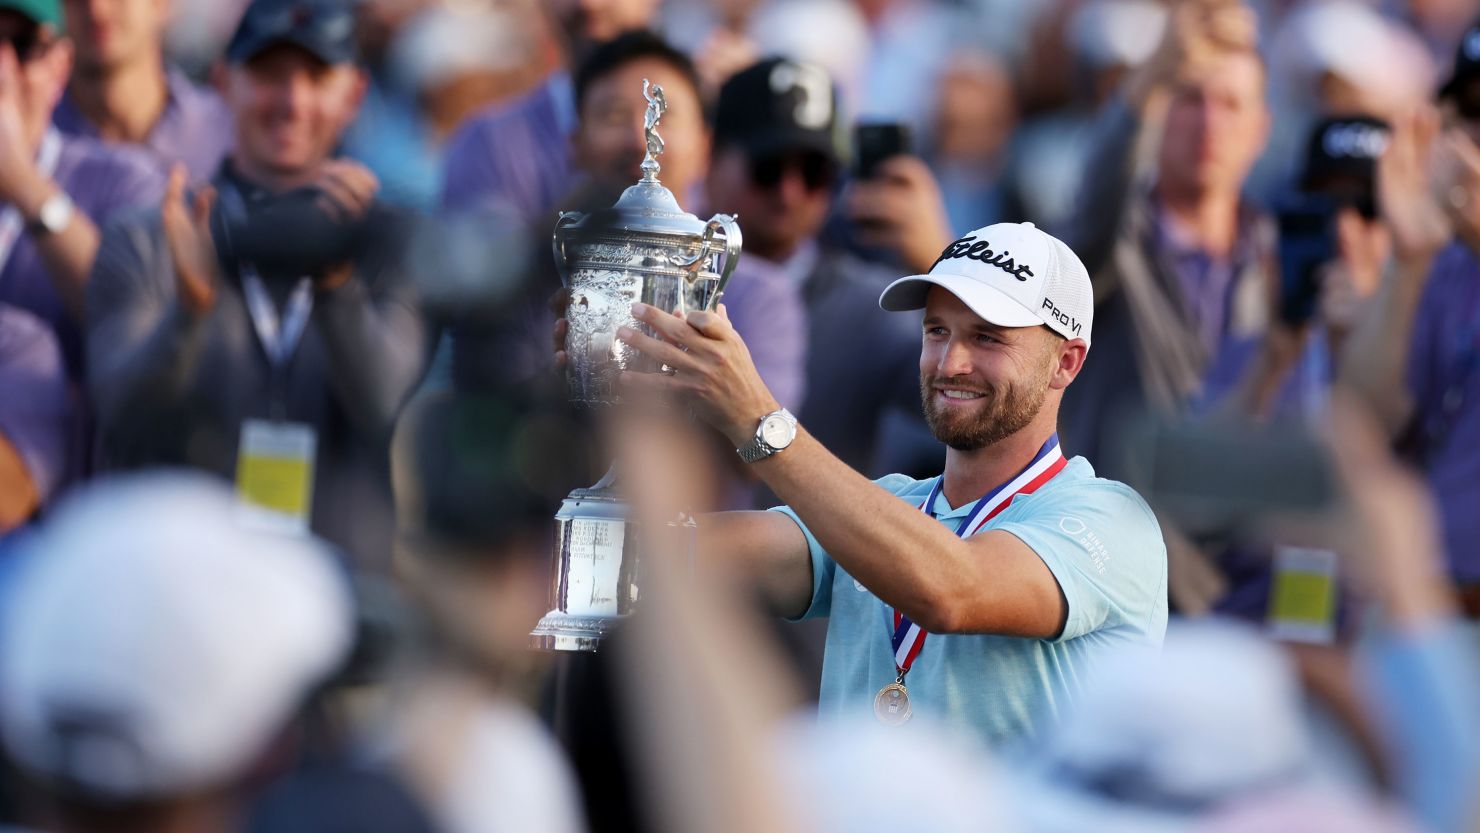 Wyndham Clark of the United States poses with the trophy after winning the 123rd U.S. Open Championship at Los Angeles Country Club in California.